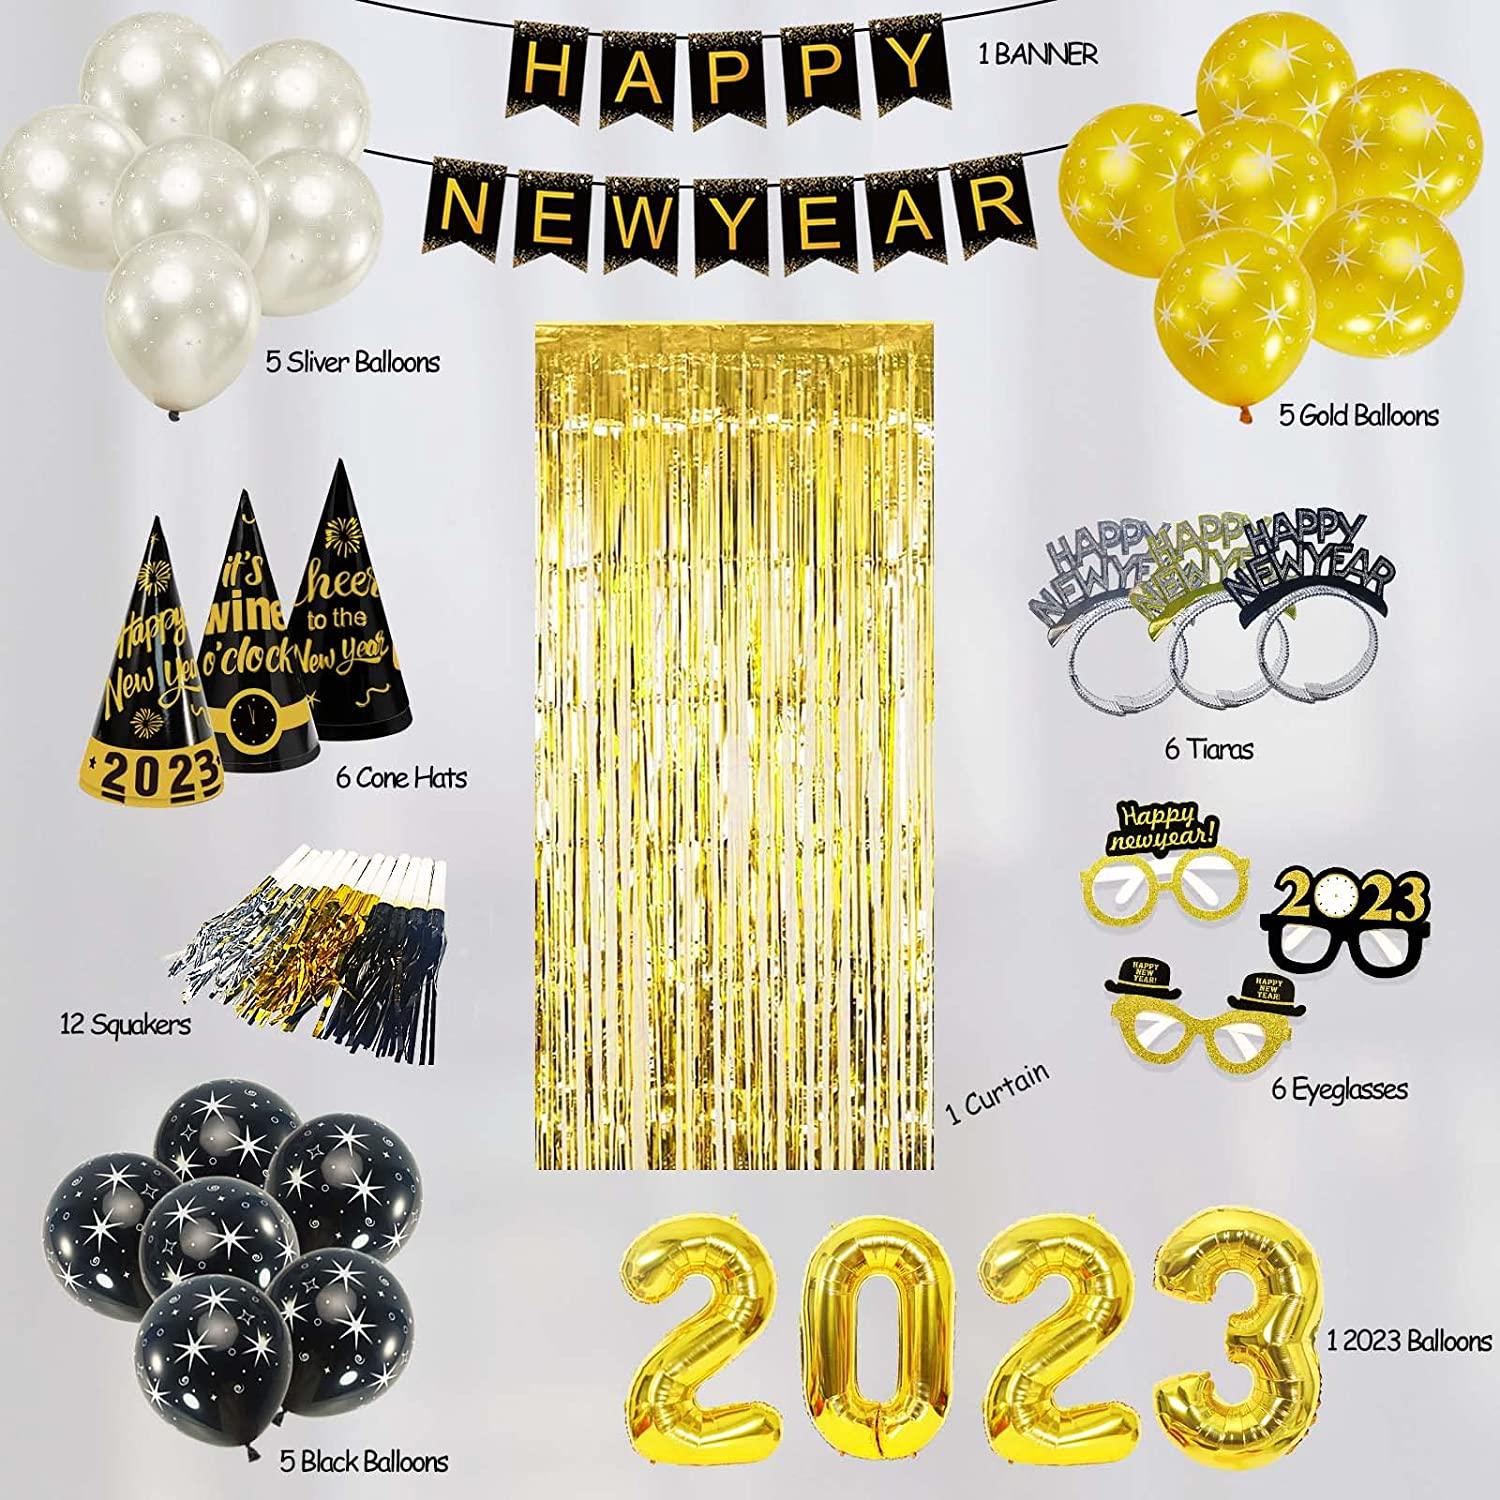 New Years Eve Party Supplies 2023 - Happy New Year Decorations Kit - Decotree.co Online Shop